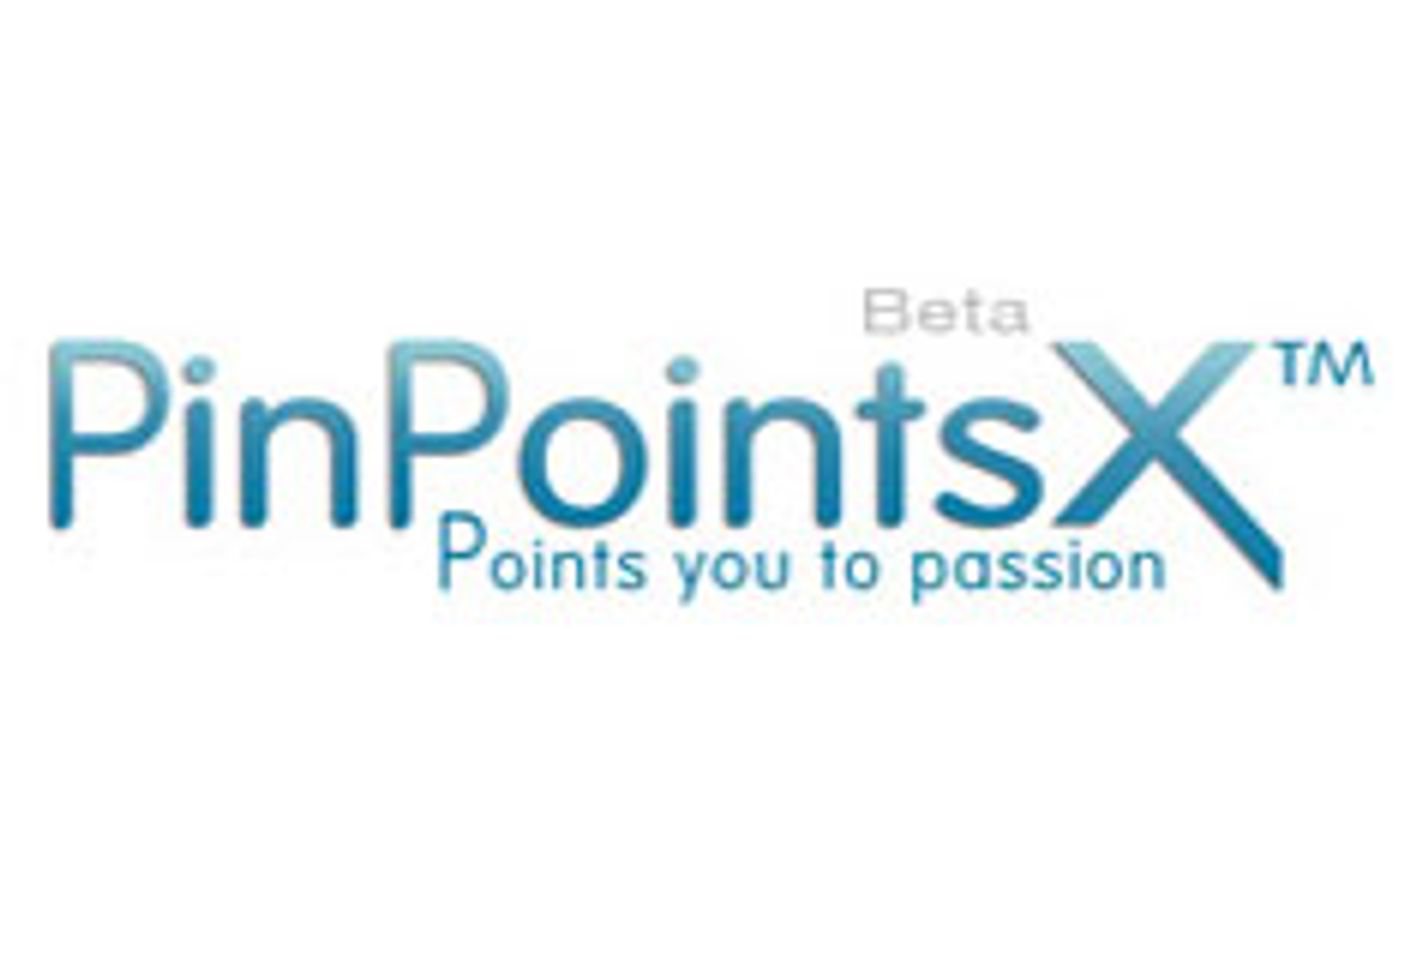 PinPointsX.com Delivers the Goods to Adult Entertainers